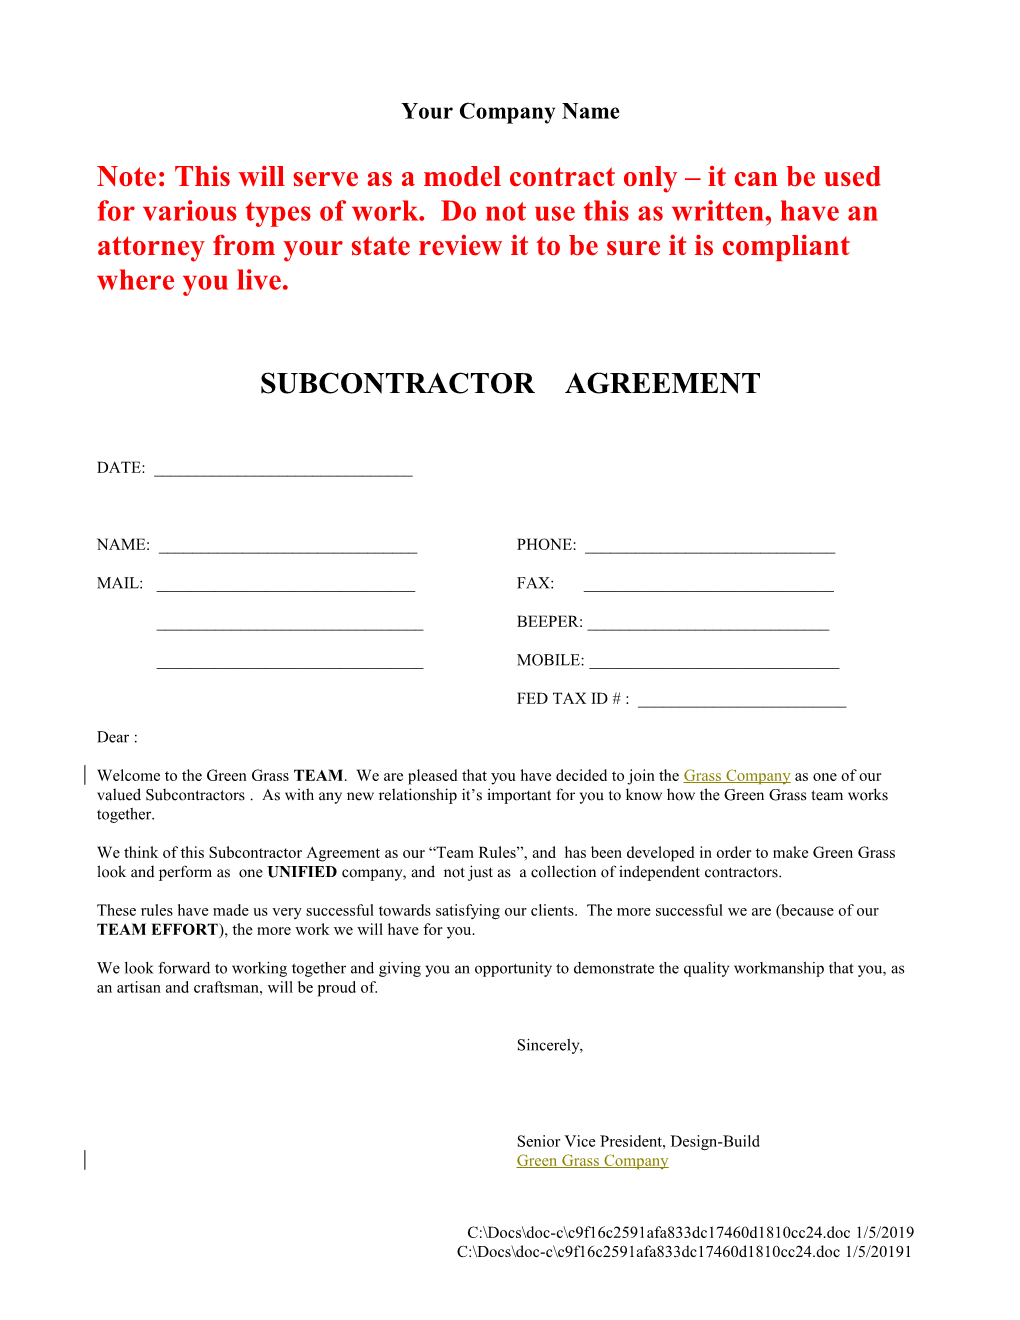 Subcontractor Contract Agreement